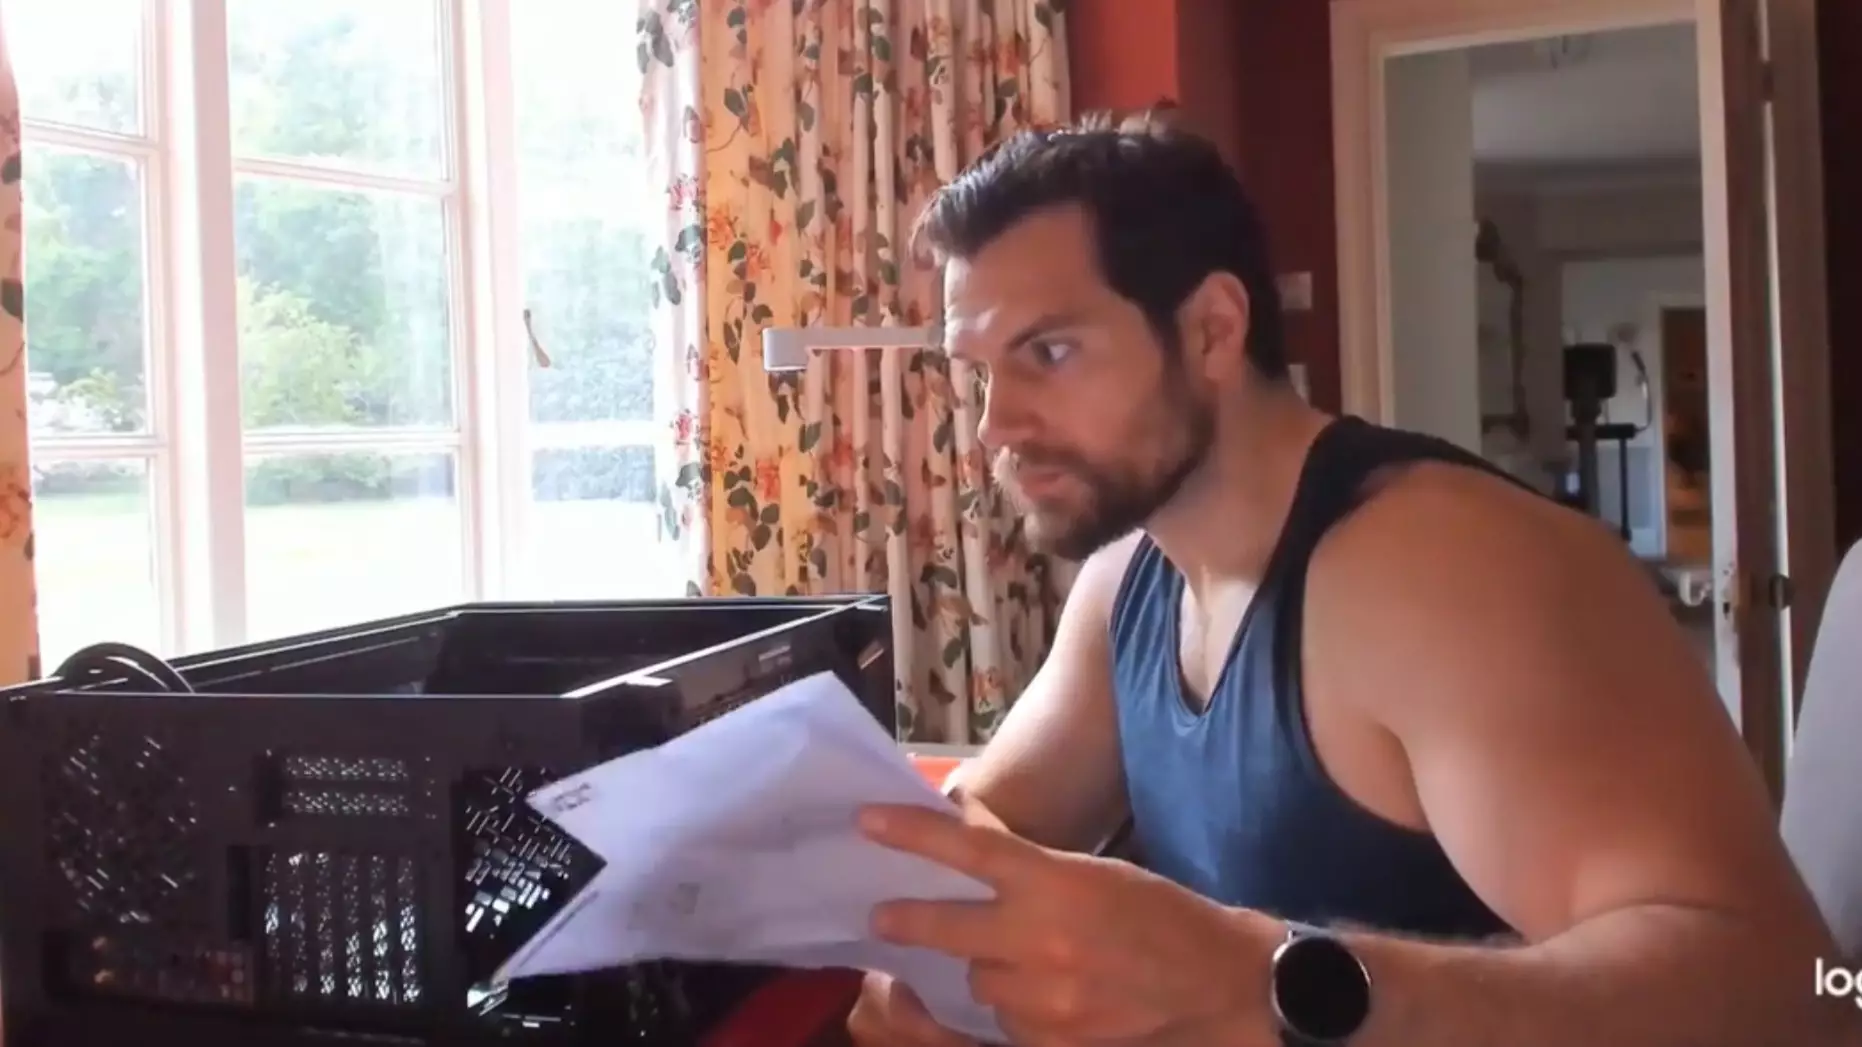 Henry Cavill Builds His Own Gaming PC From Scratch 